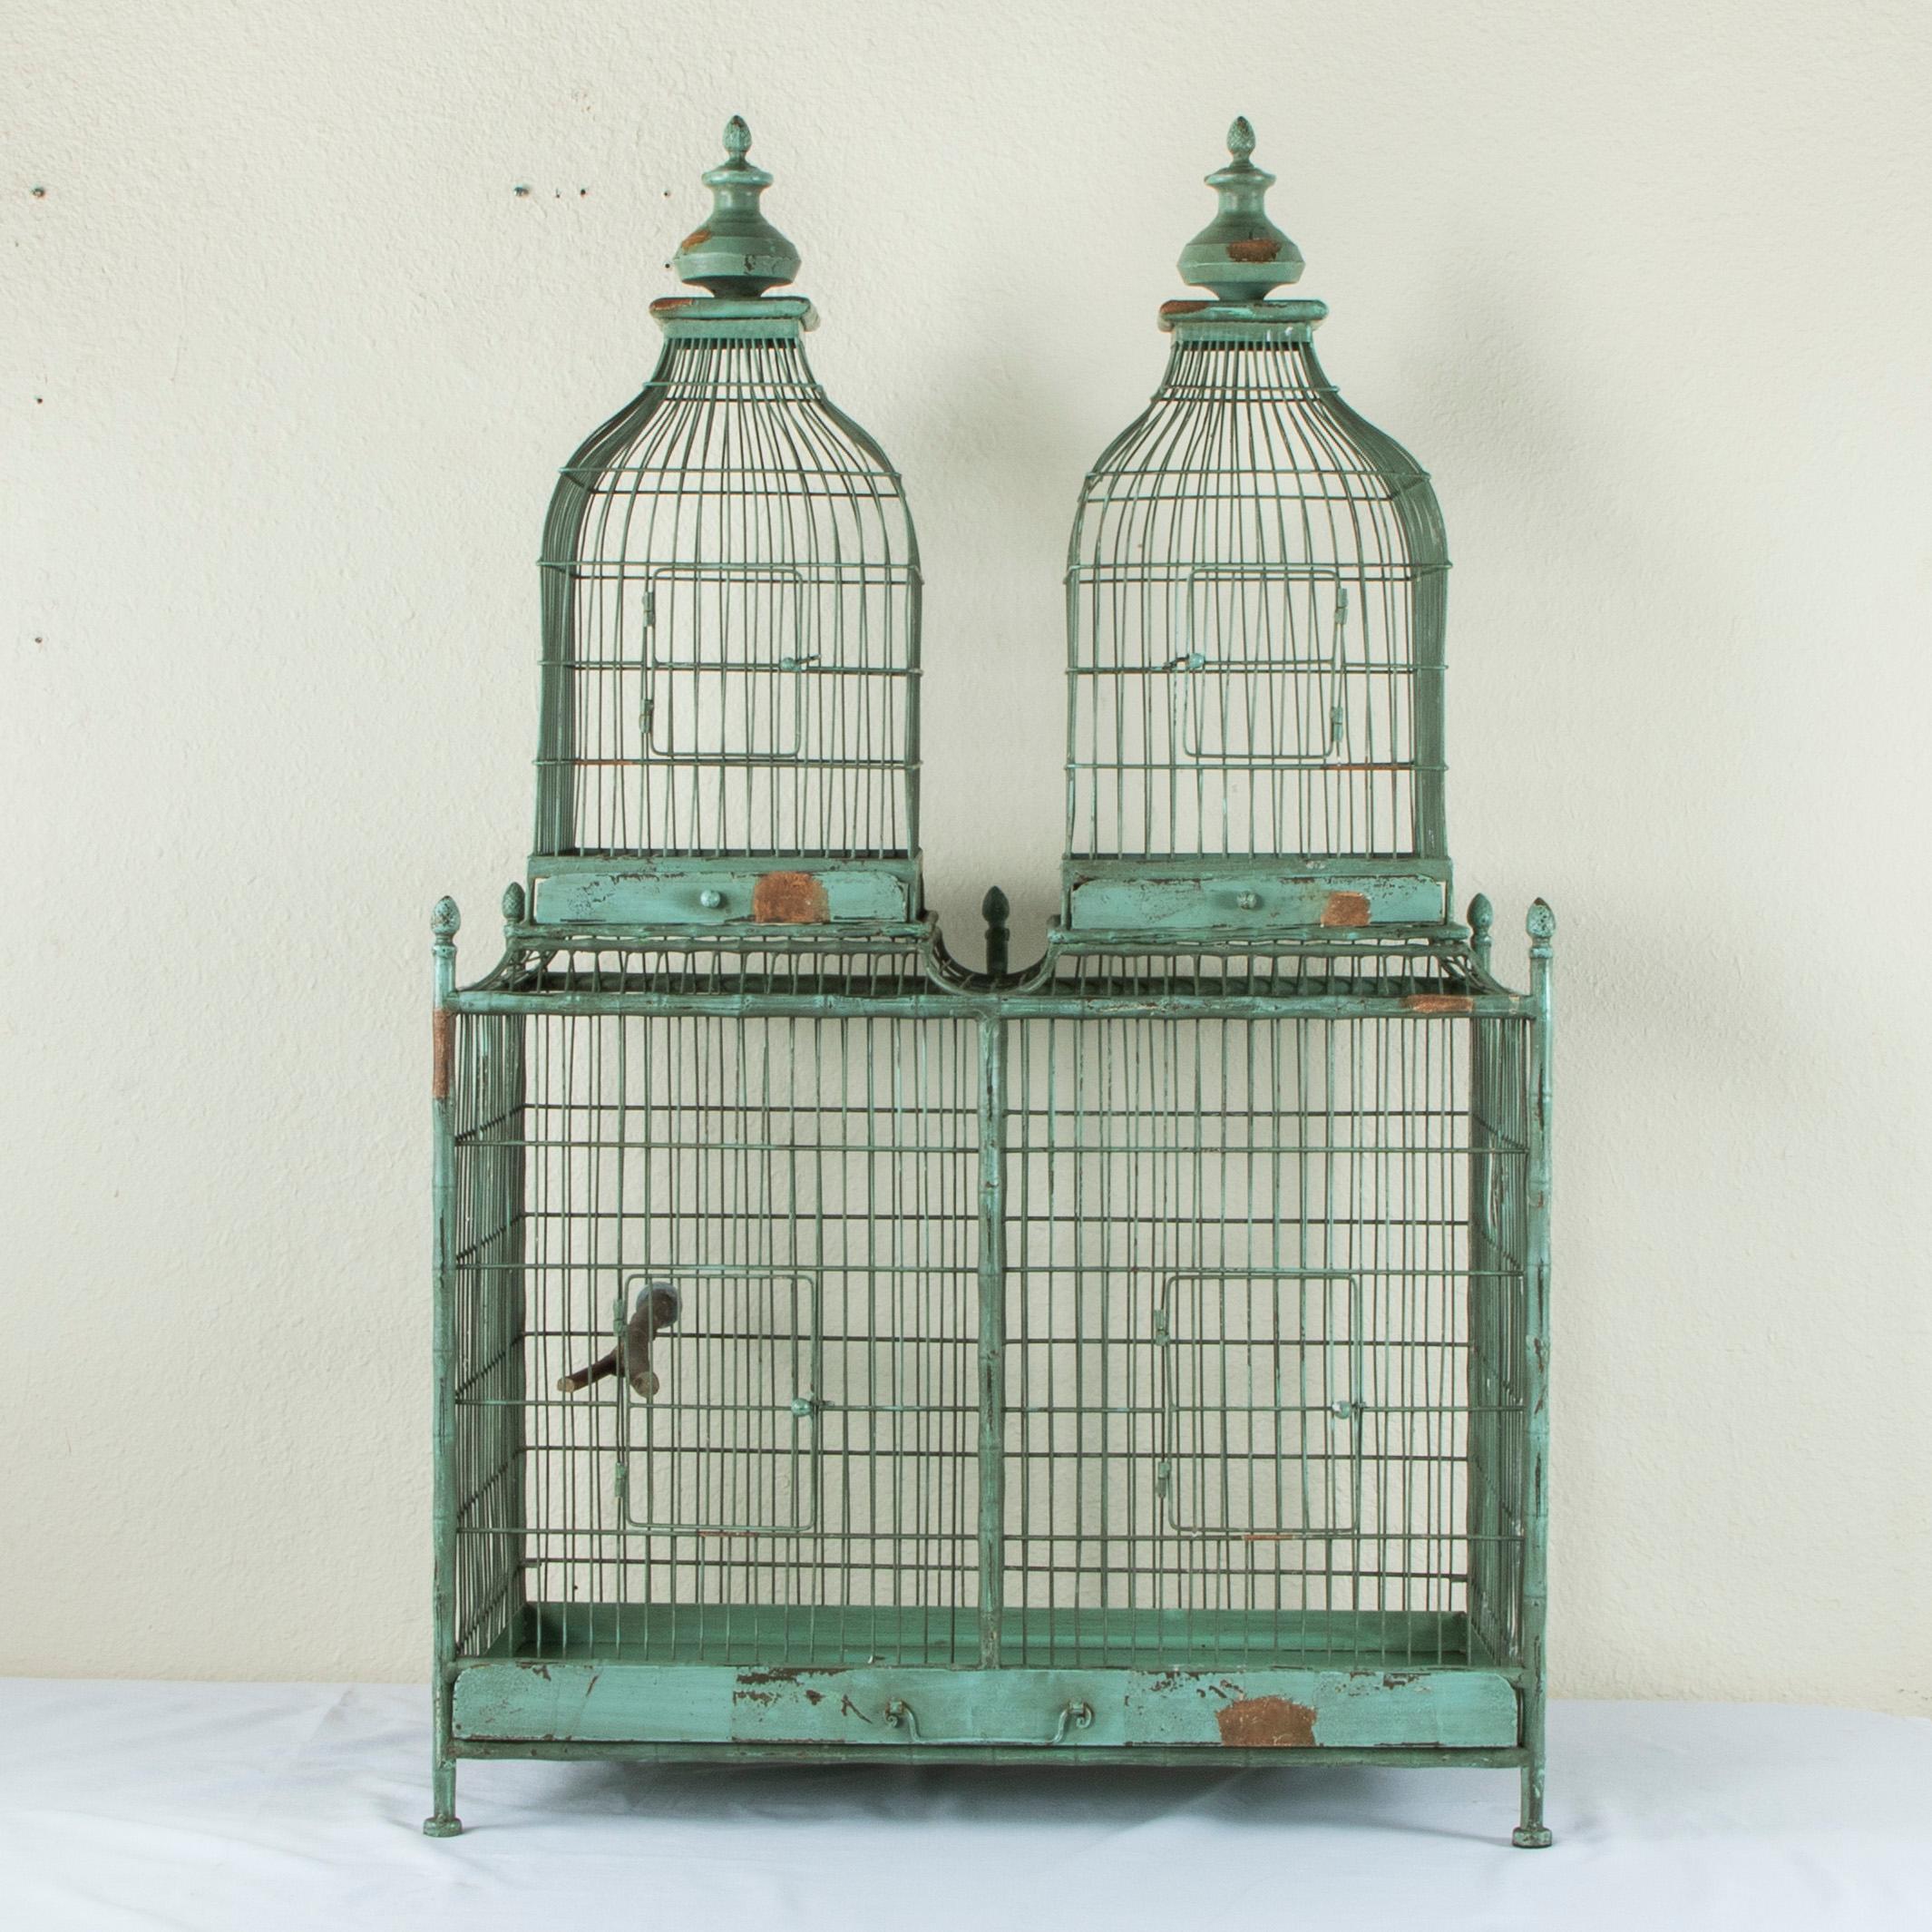 Found in Normandy, France, this very large painted metal and wire bird cage takes the form of a double roofed house and features faux bamboo detailing and pinecone finials. The lower compartment has a removable bottom, two doors, and a wooden perch.